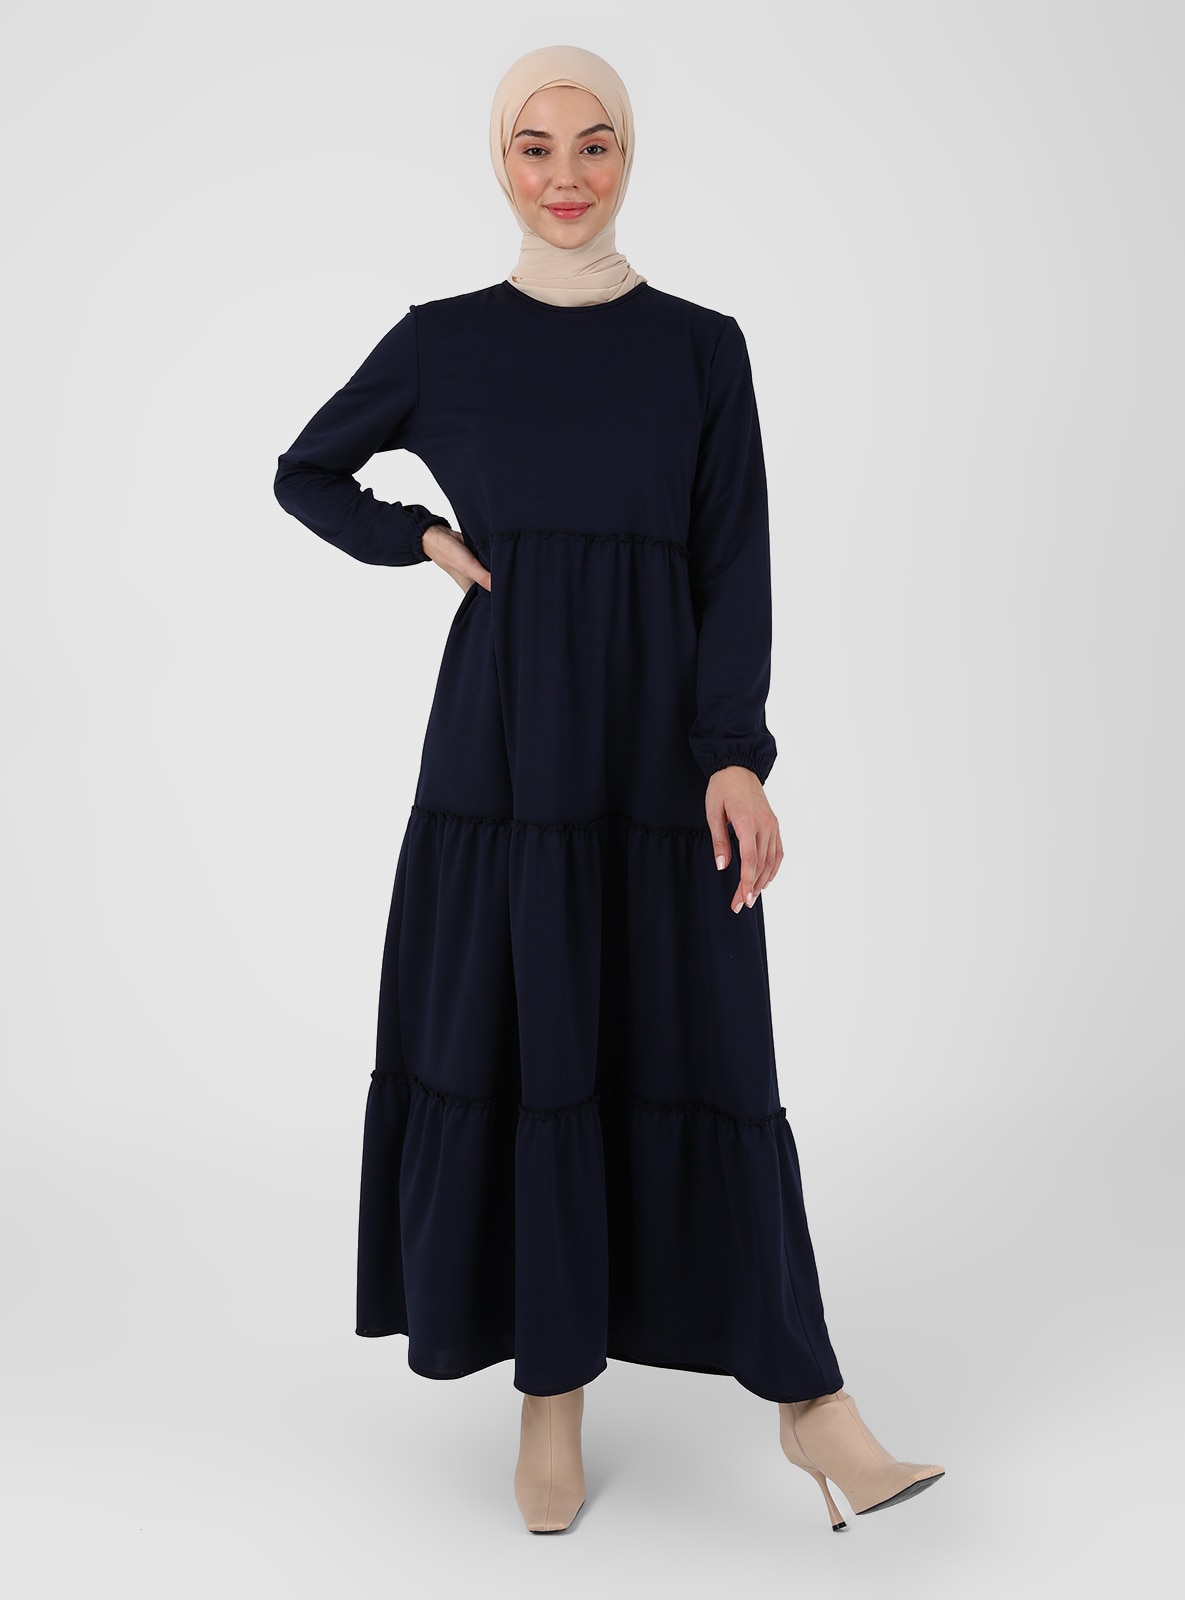 Modest Dress With Elastic Sleeve Ends Navy Blue